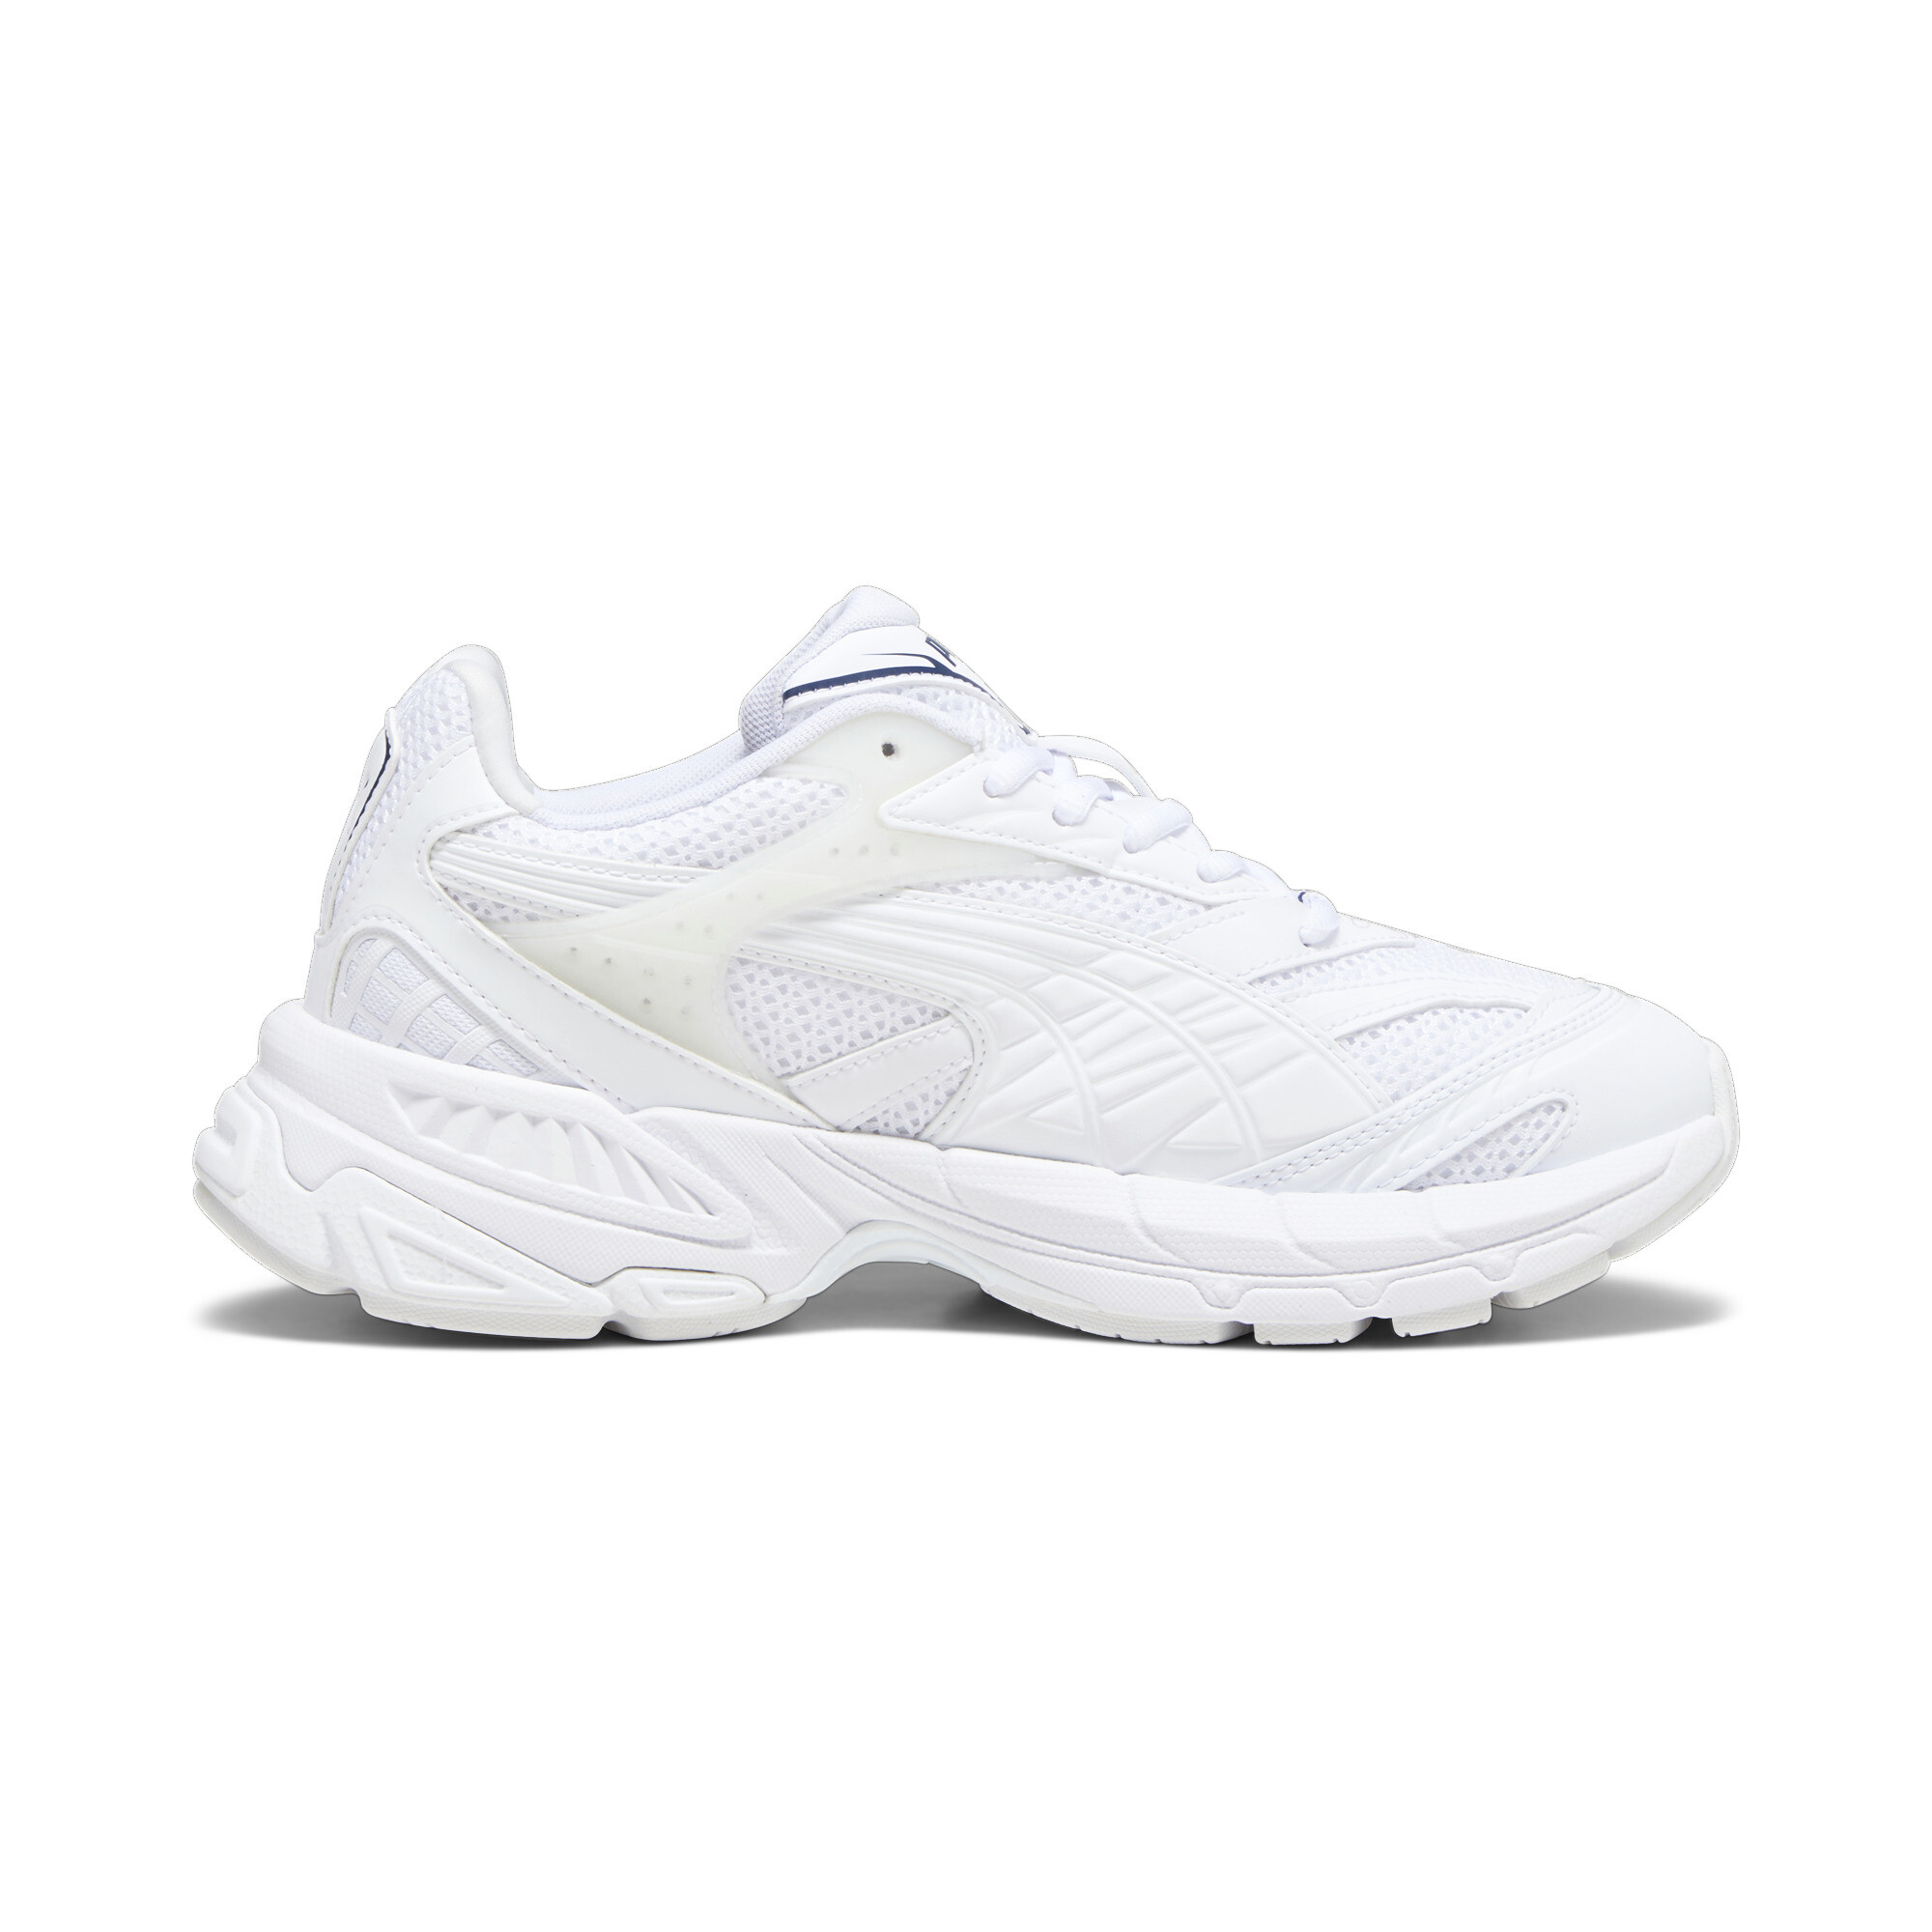 Puma Velophasis Technisch Sneakers, White, Size 44.5, Shoes